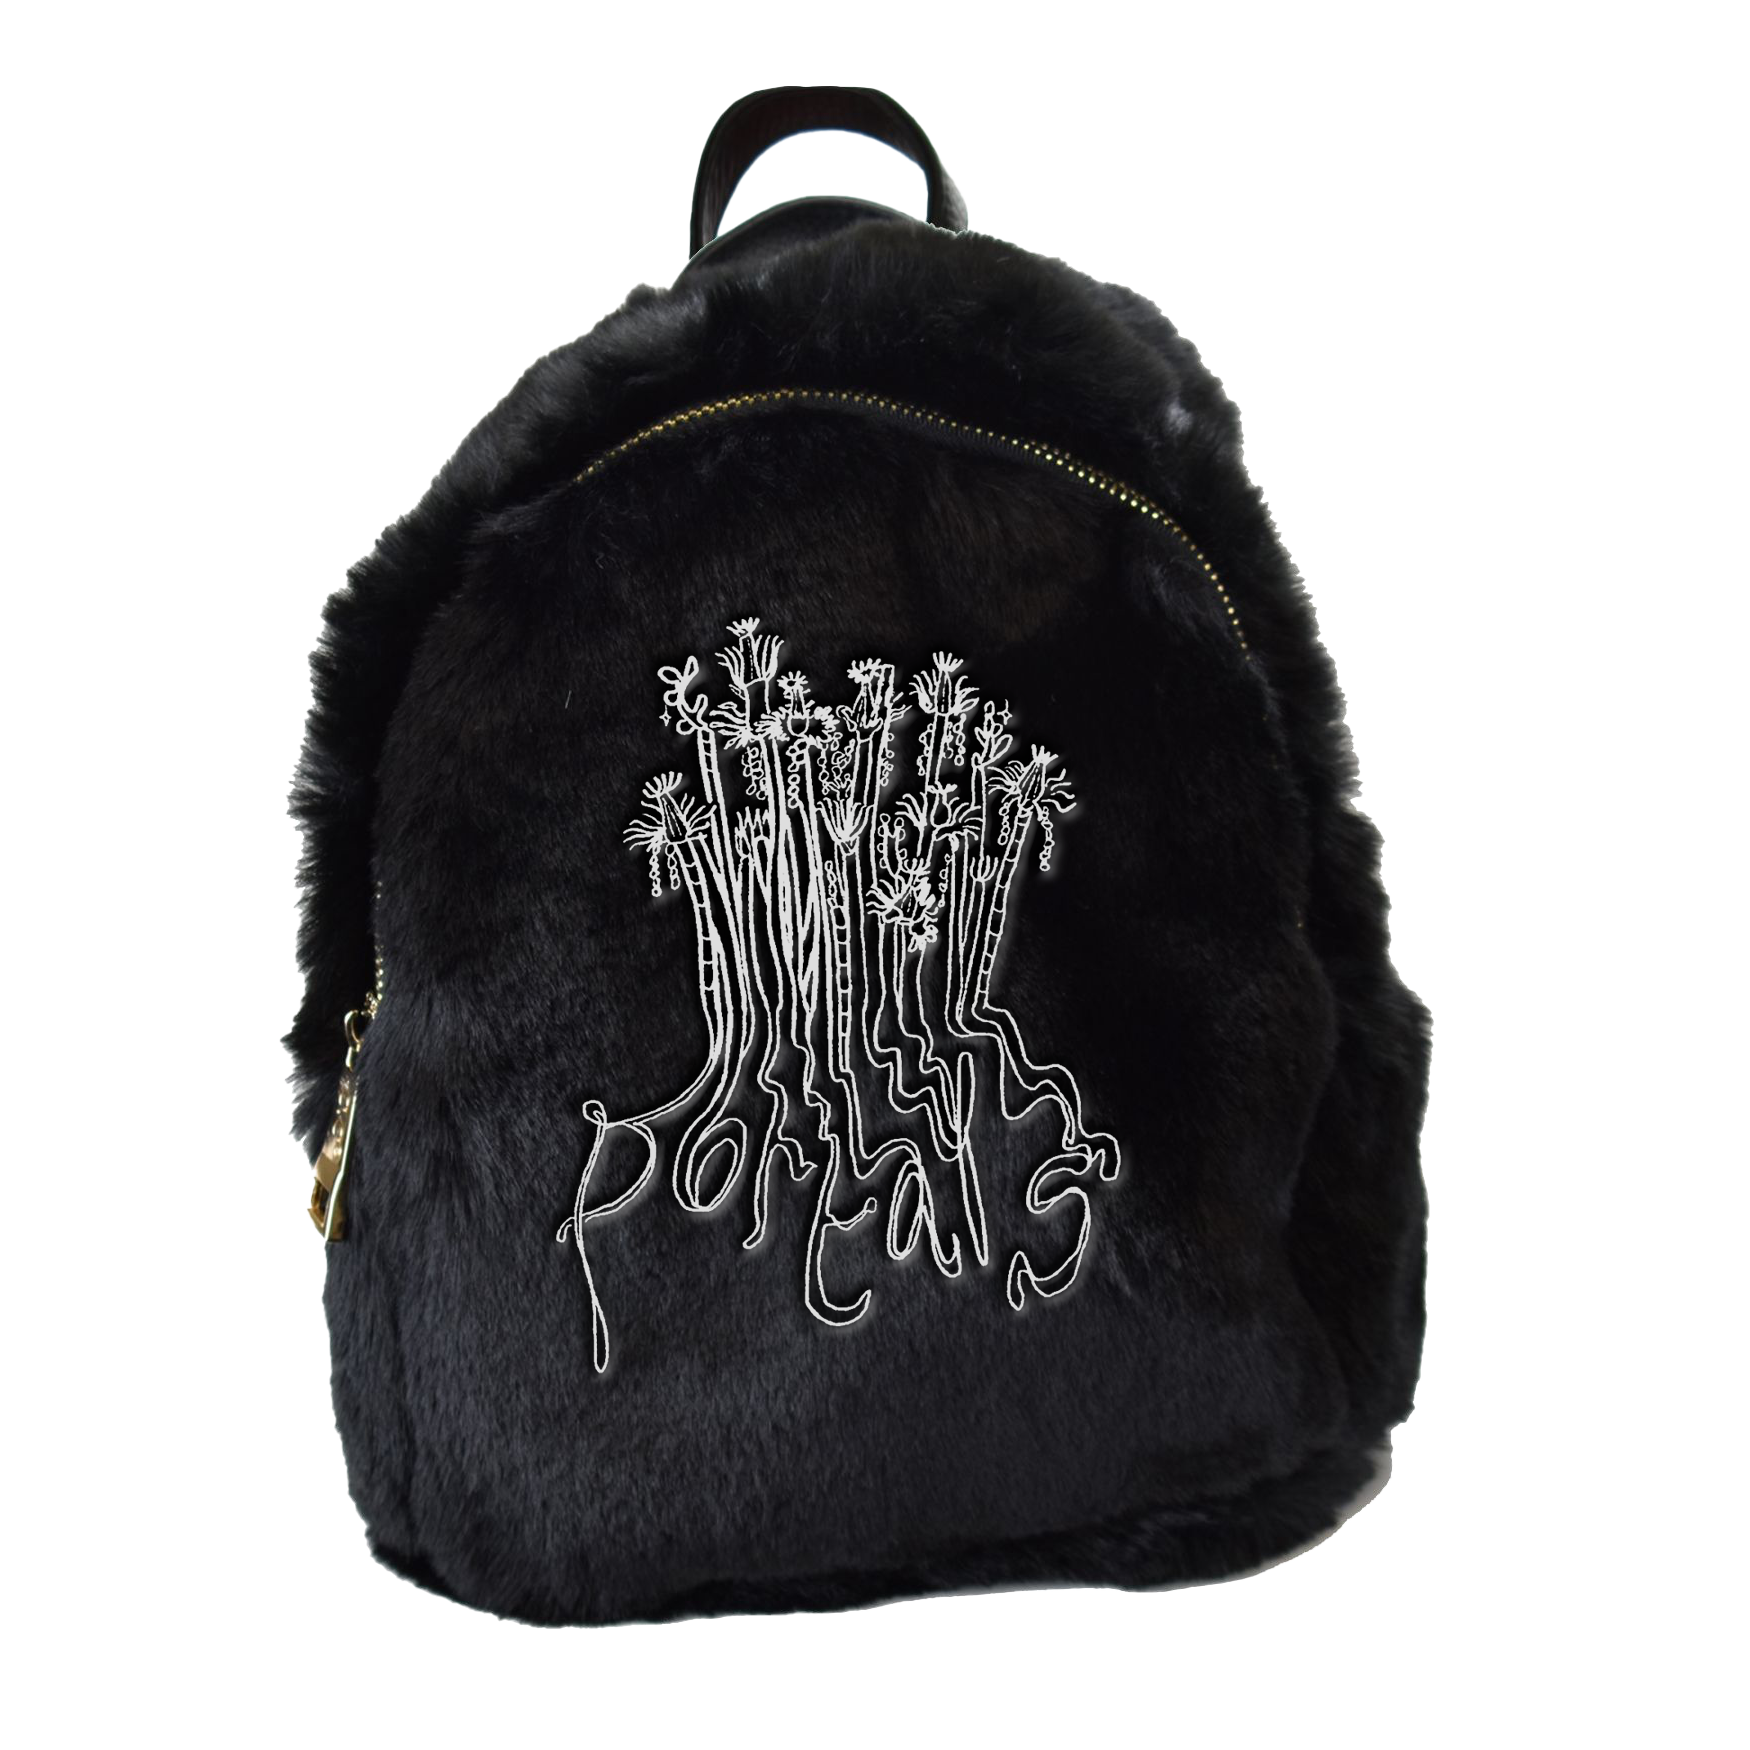 Portals Fuzzy Backpack | Melanie Martinez Official Store